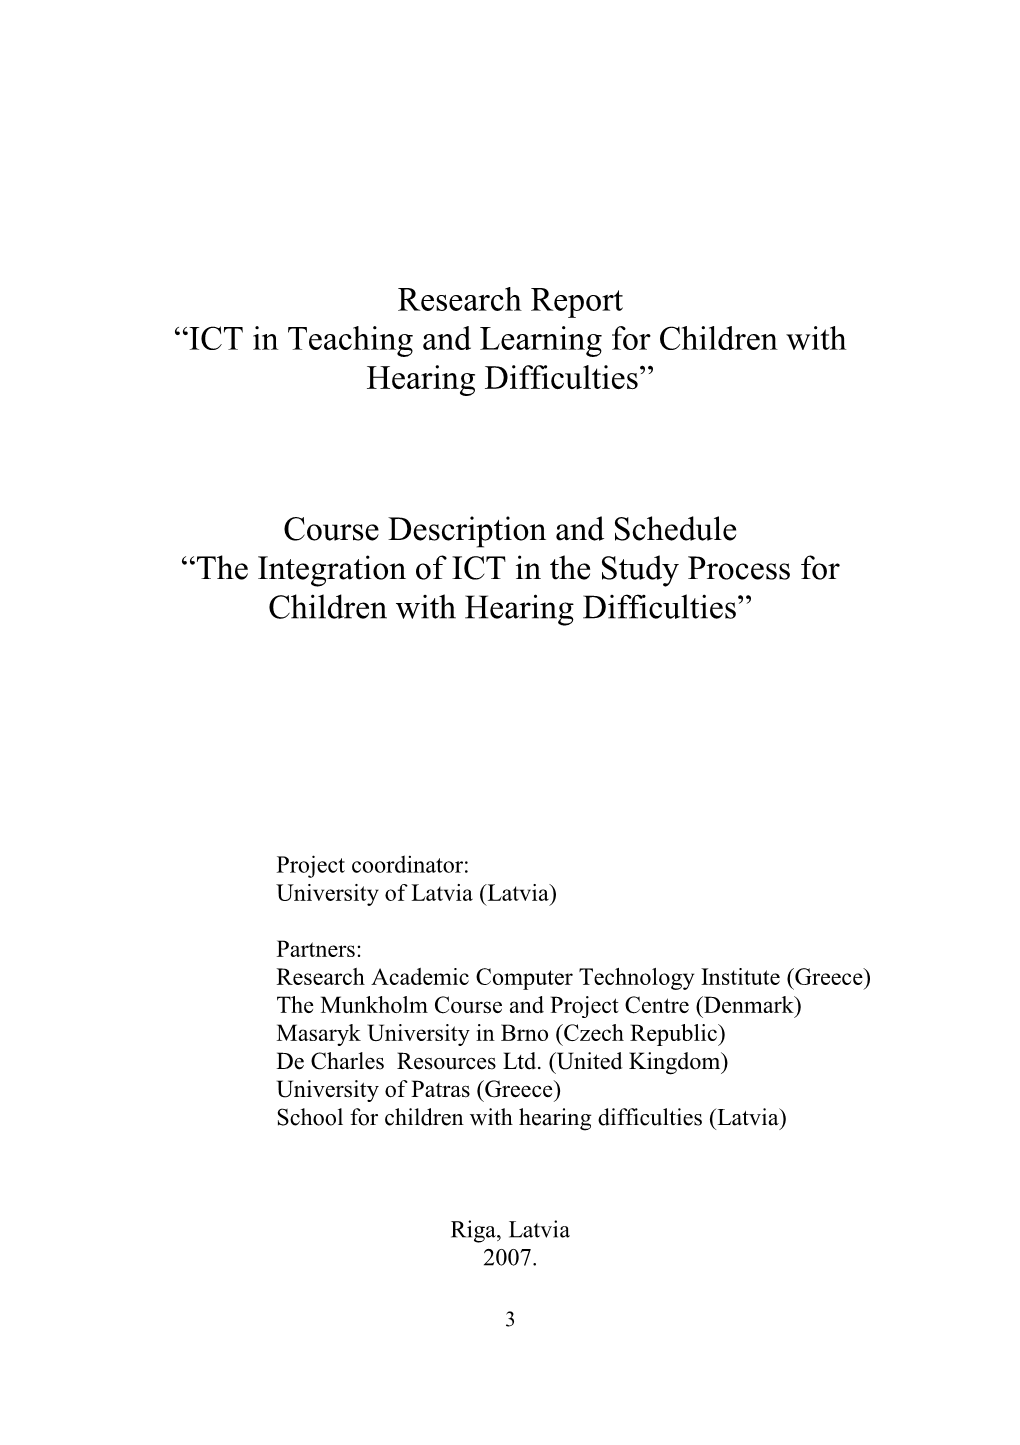 ICT in Teaching and Learning for Children with Hearing Difficulties